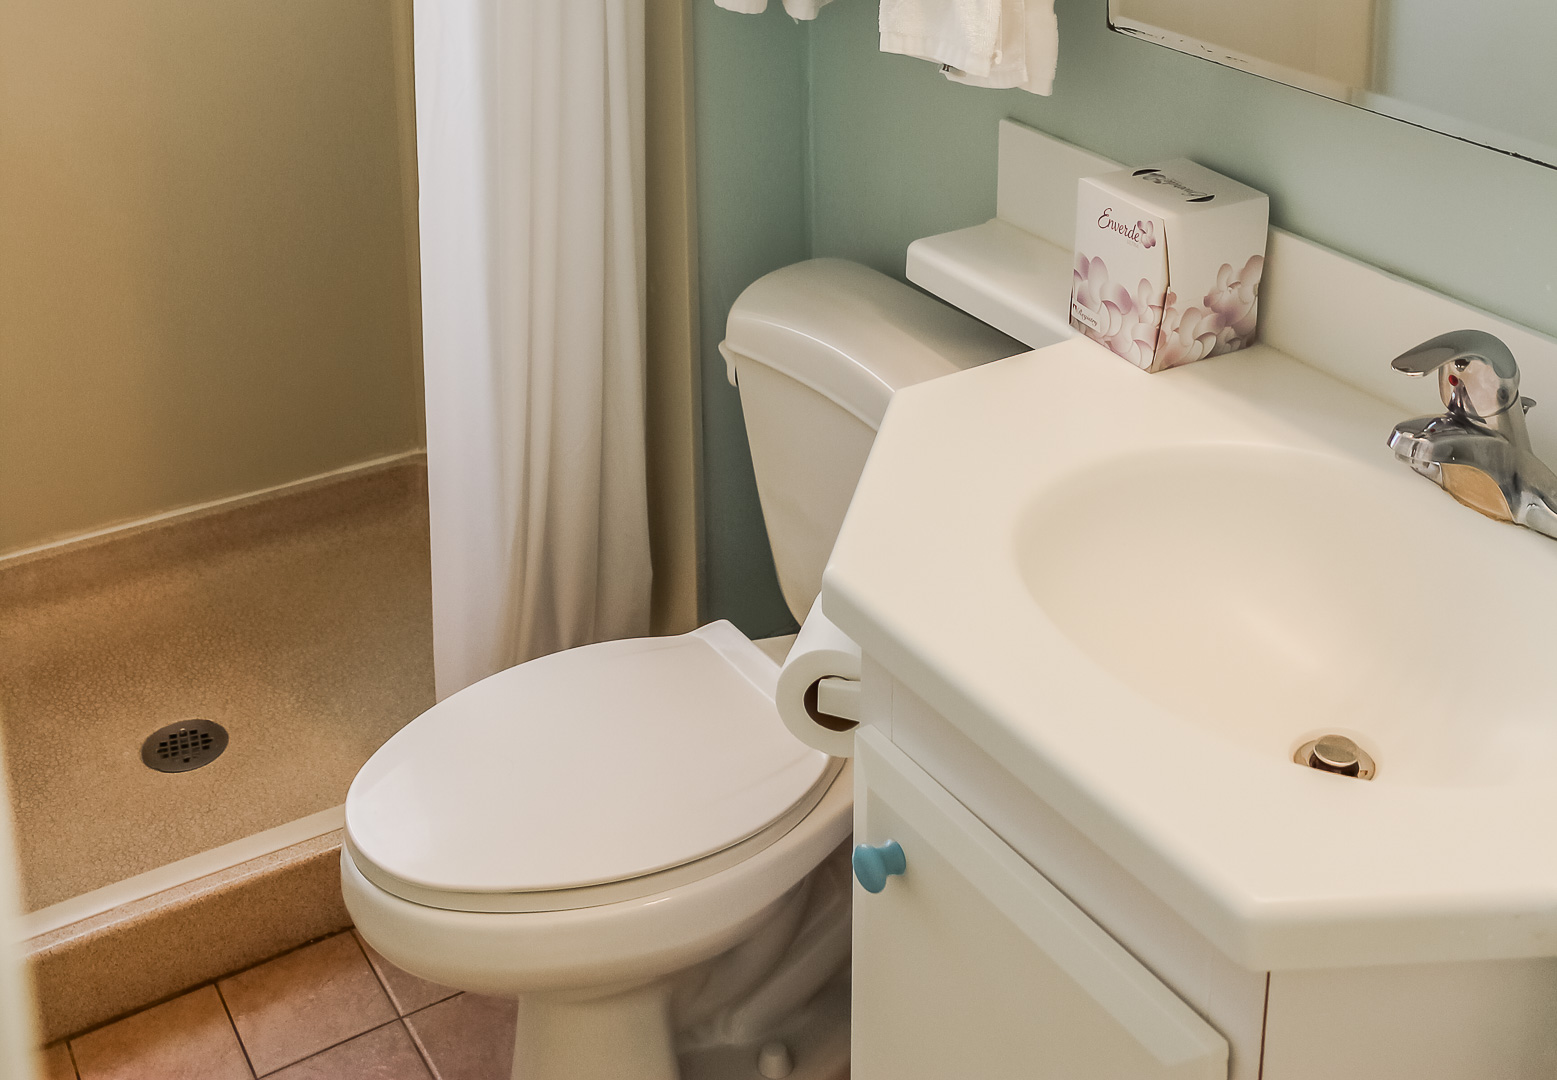 A clean bathroom at VRI's Berkshire by the Sea in Florida.